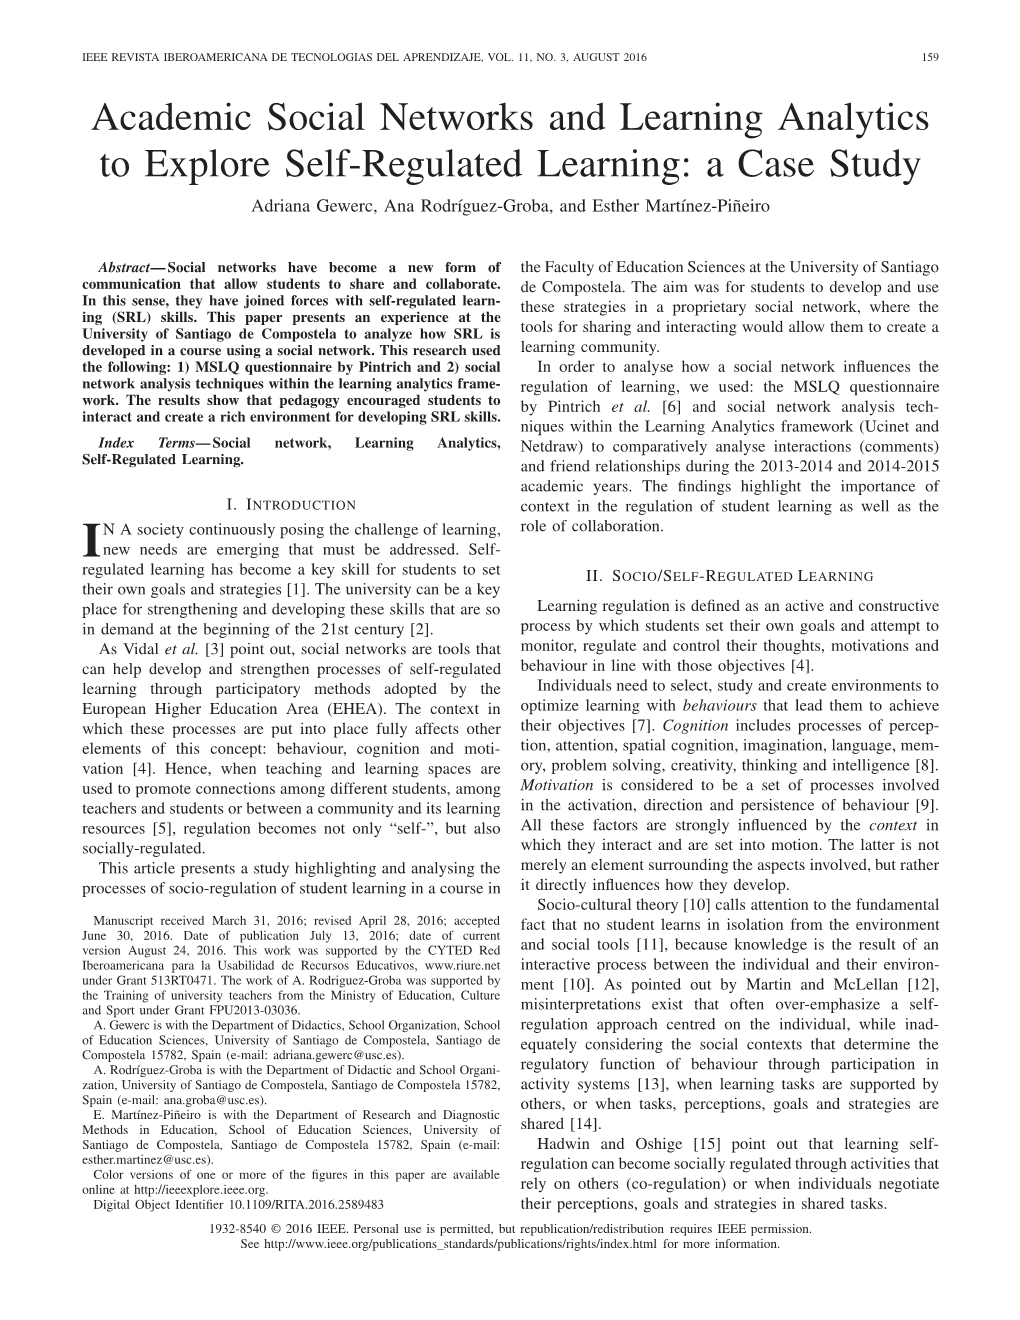 Academic Social Networks and Learning Analytics to Explore Self-Regulated Learning: a Case Study Adriana Gewerc, Ana Rodríguez-Groba, and Esther Martínez-Piñeiro